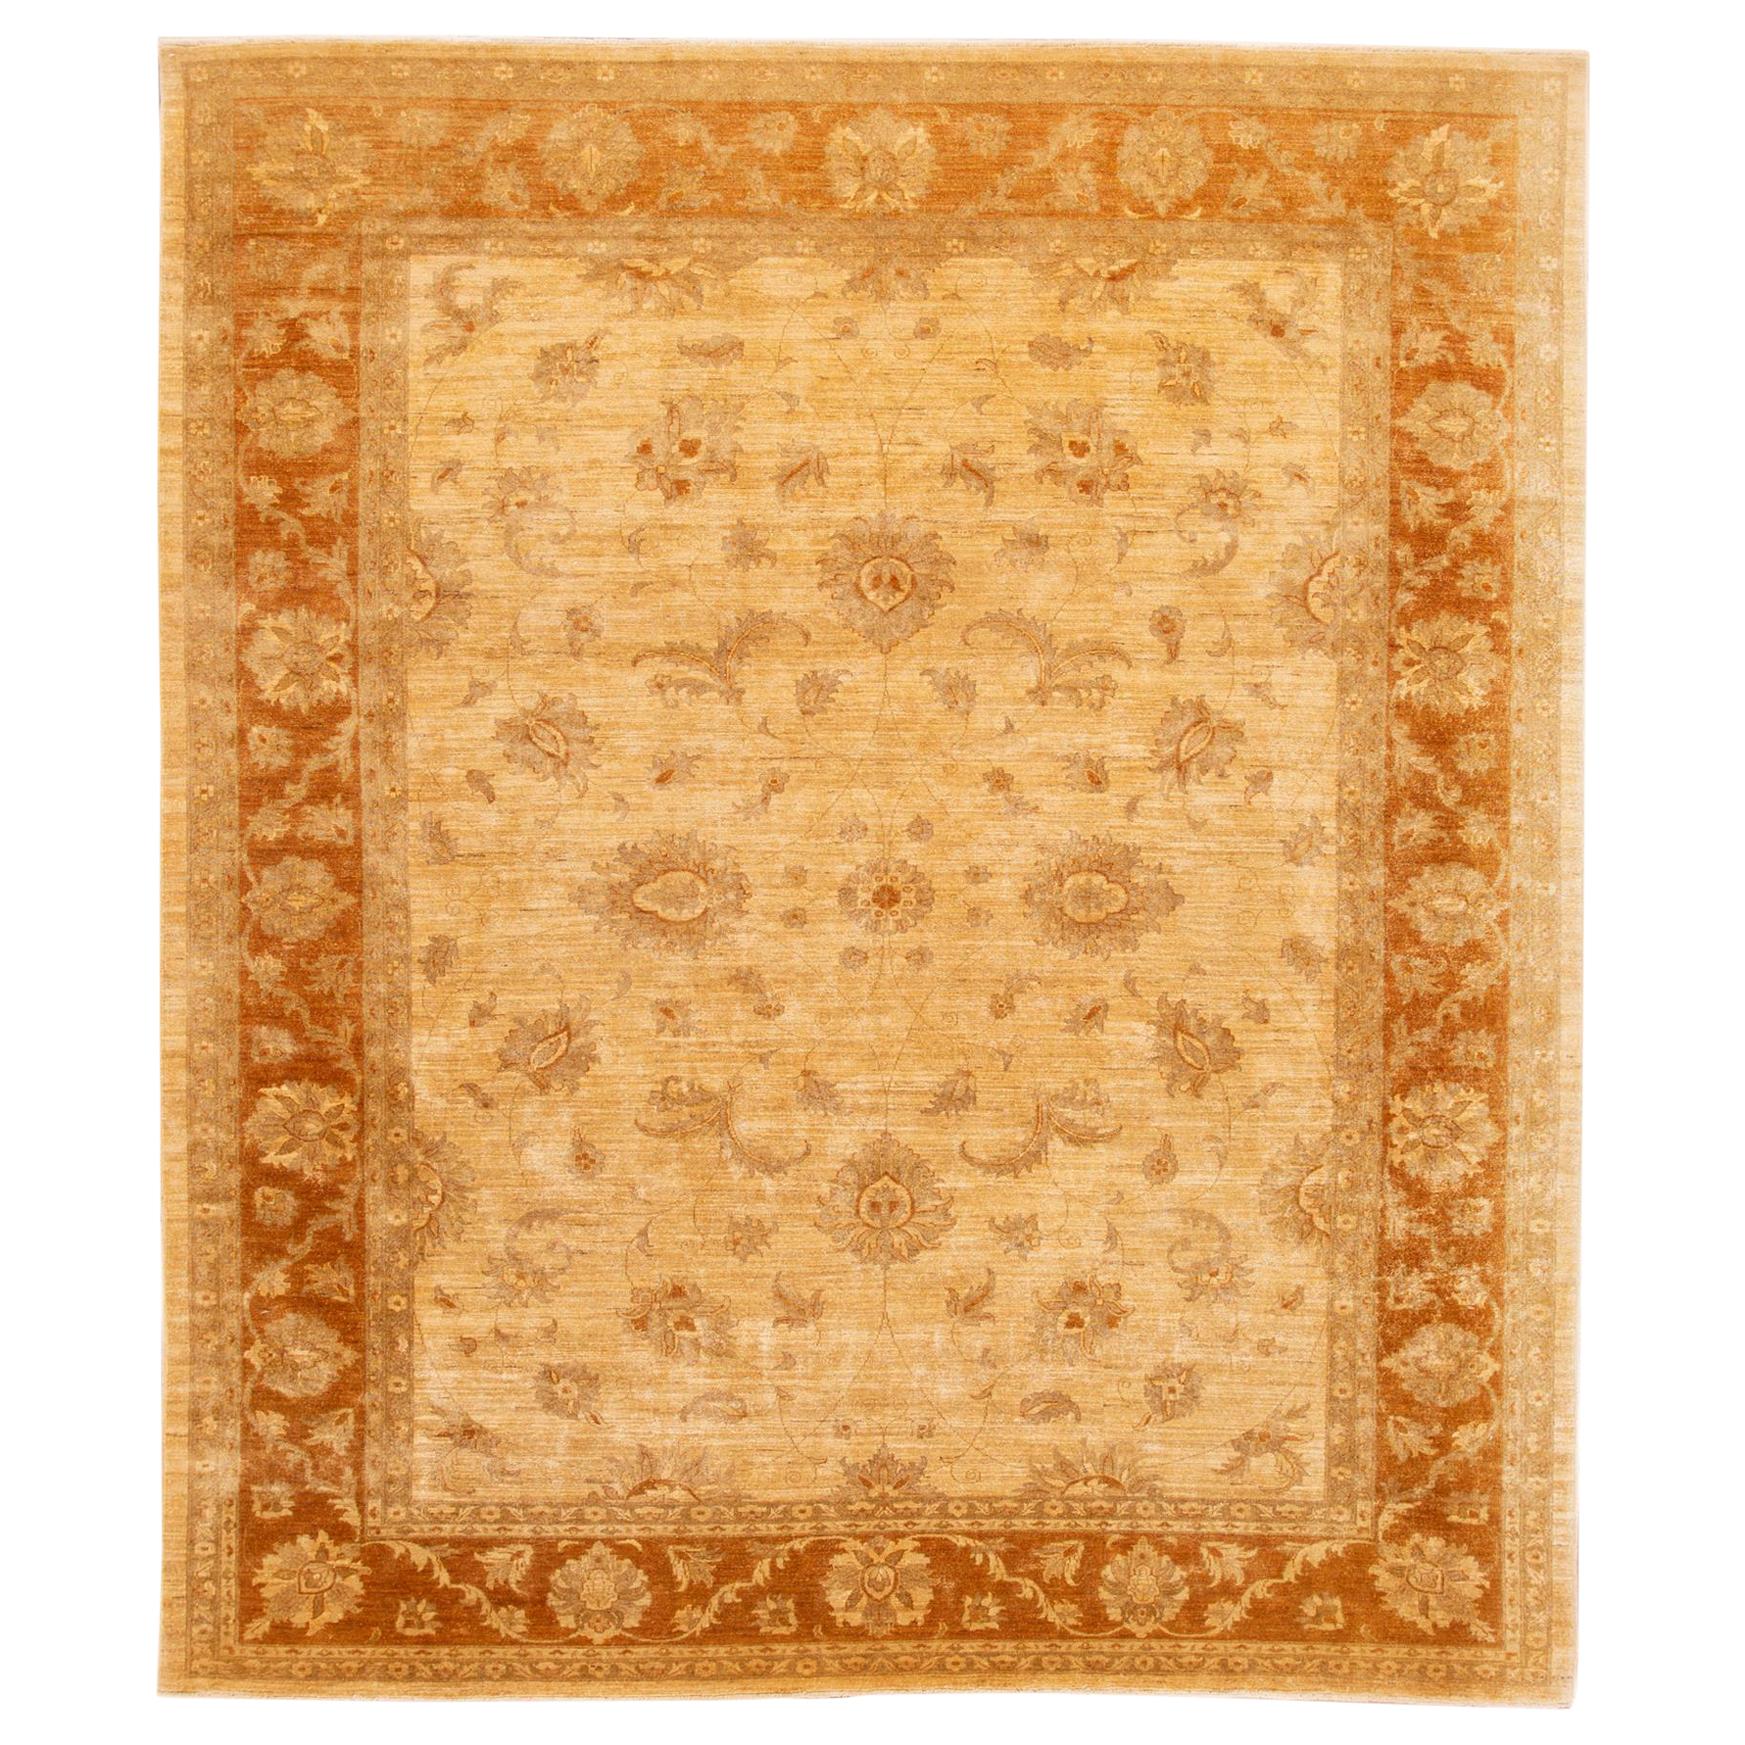 Contemporary Indian Rug